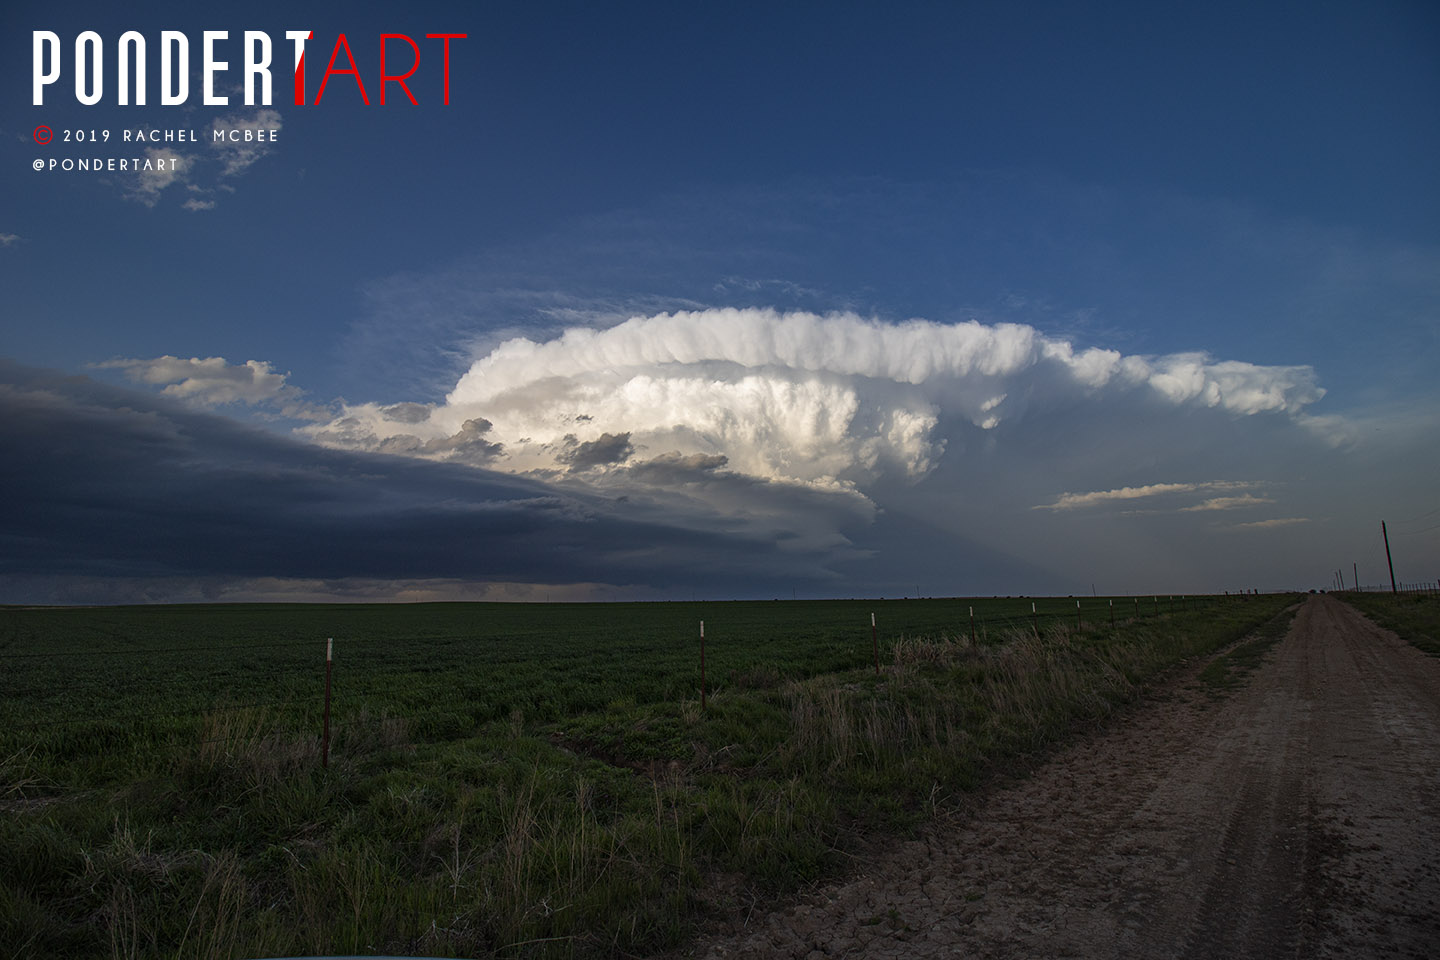 Hollis, OK supercell - from a distance